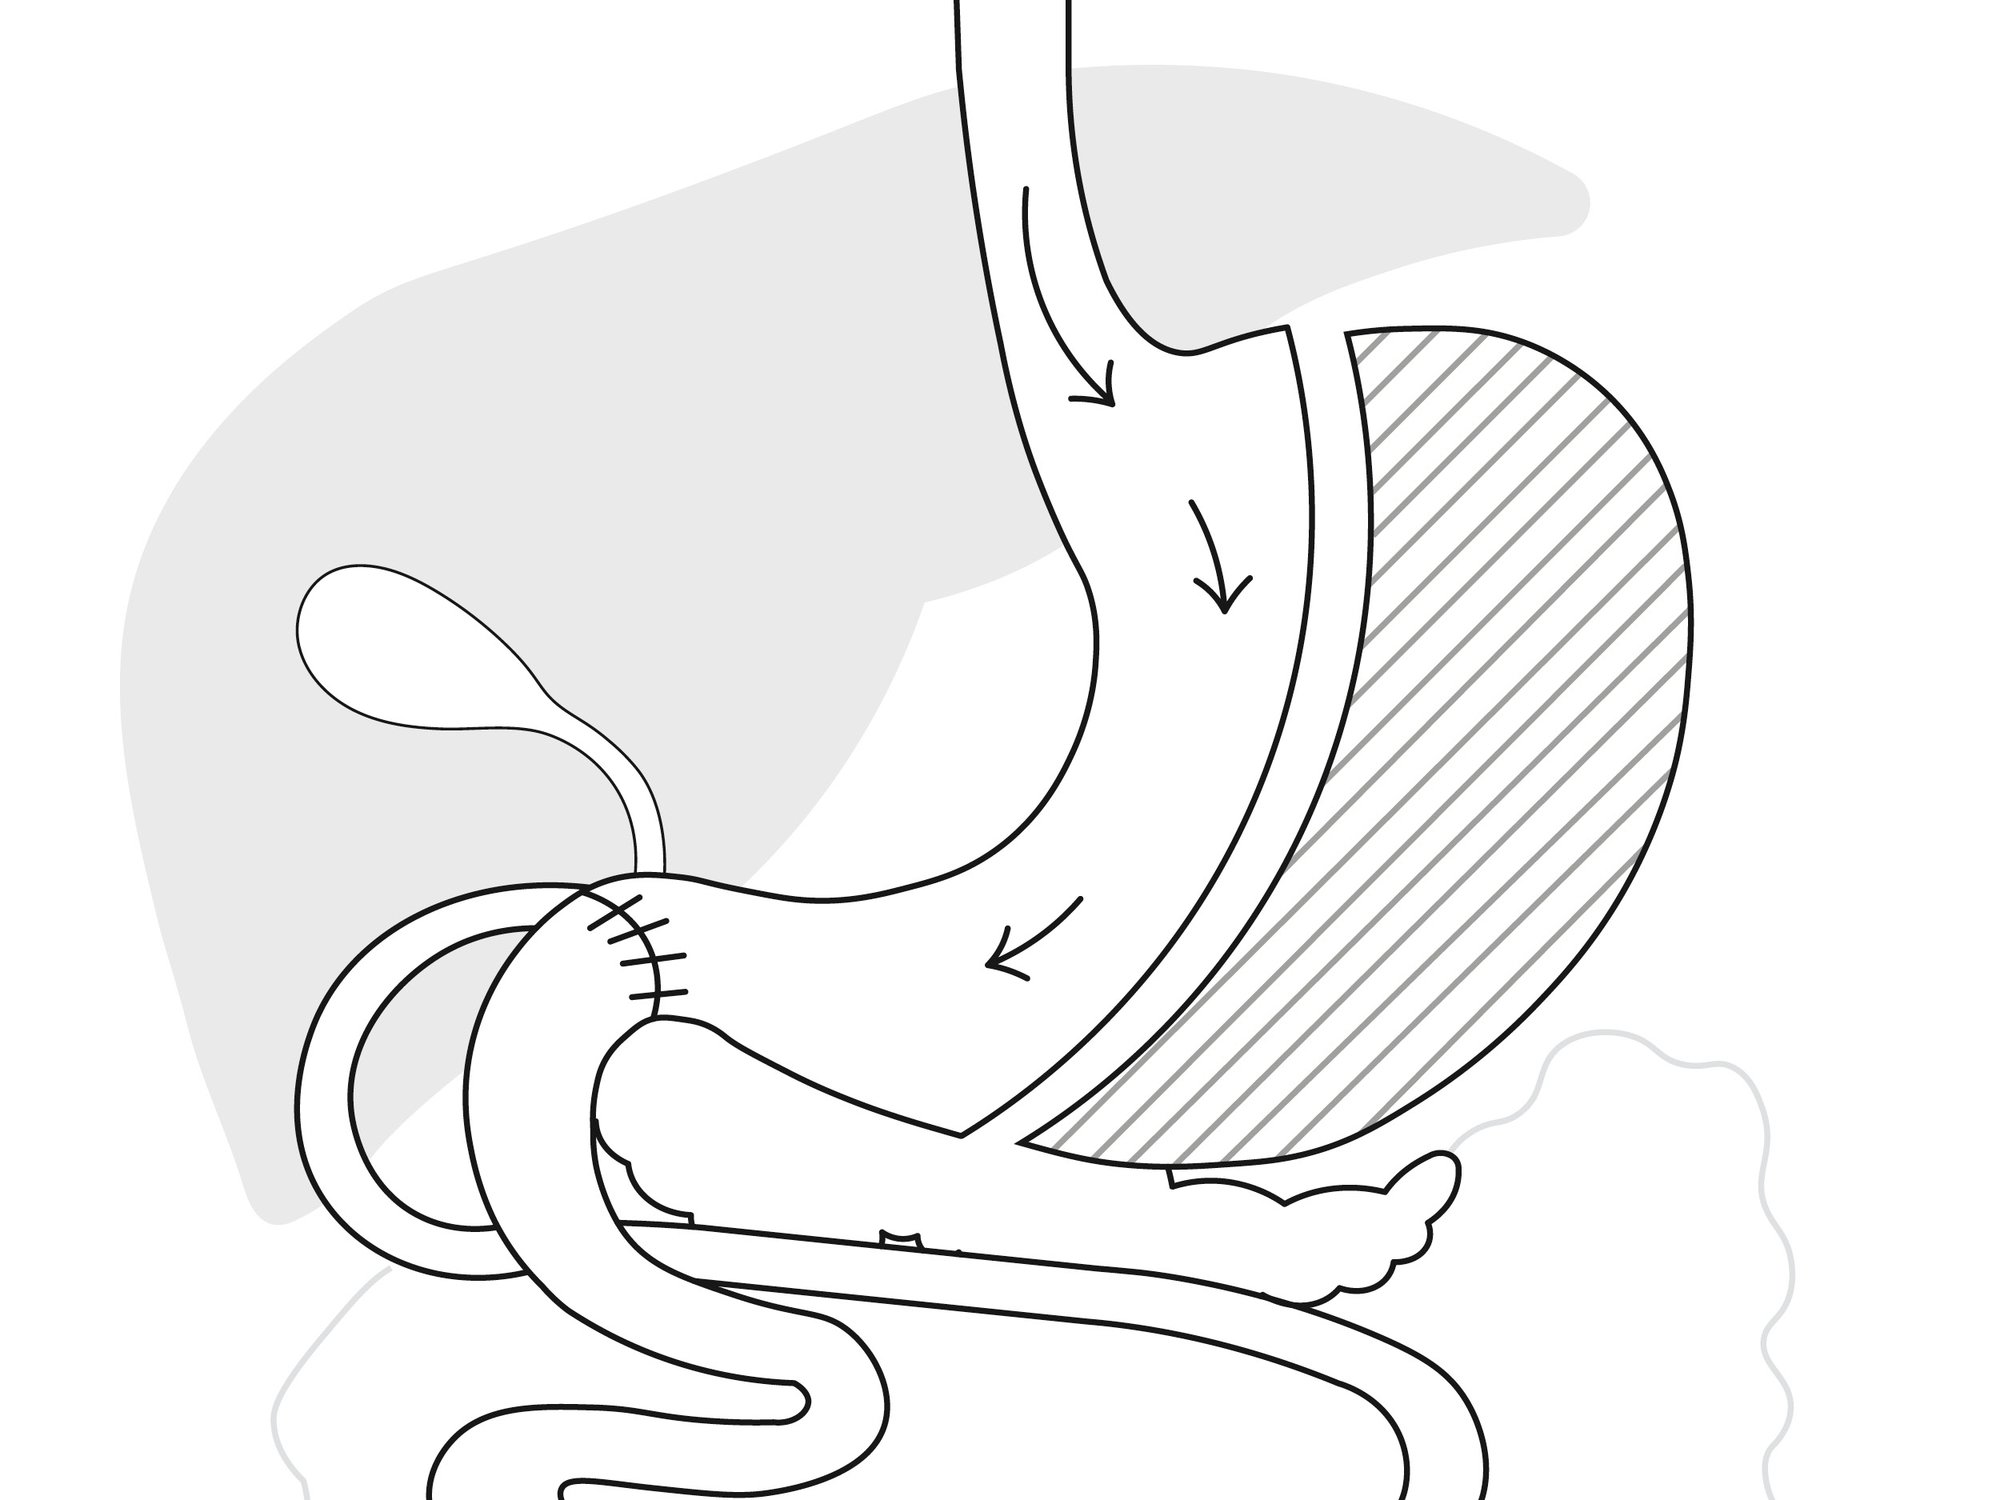 After a Biliopancreatic Diversion/Duodenal Switch, your stomach will be smaller